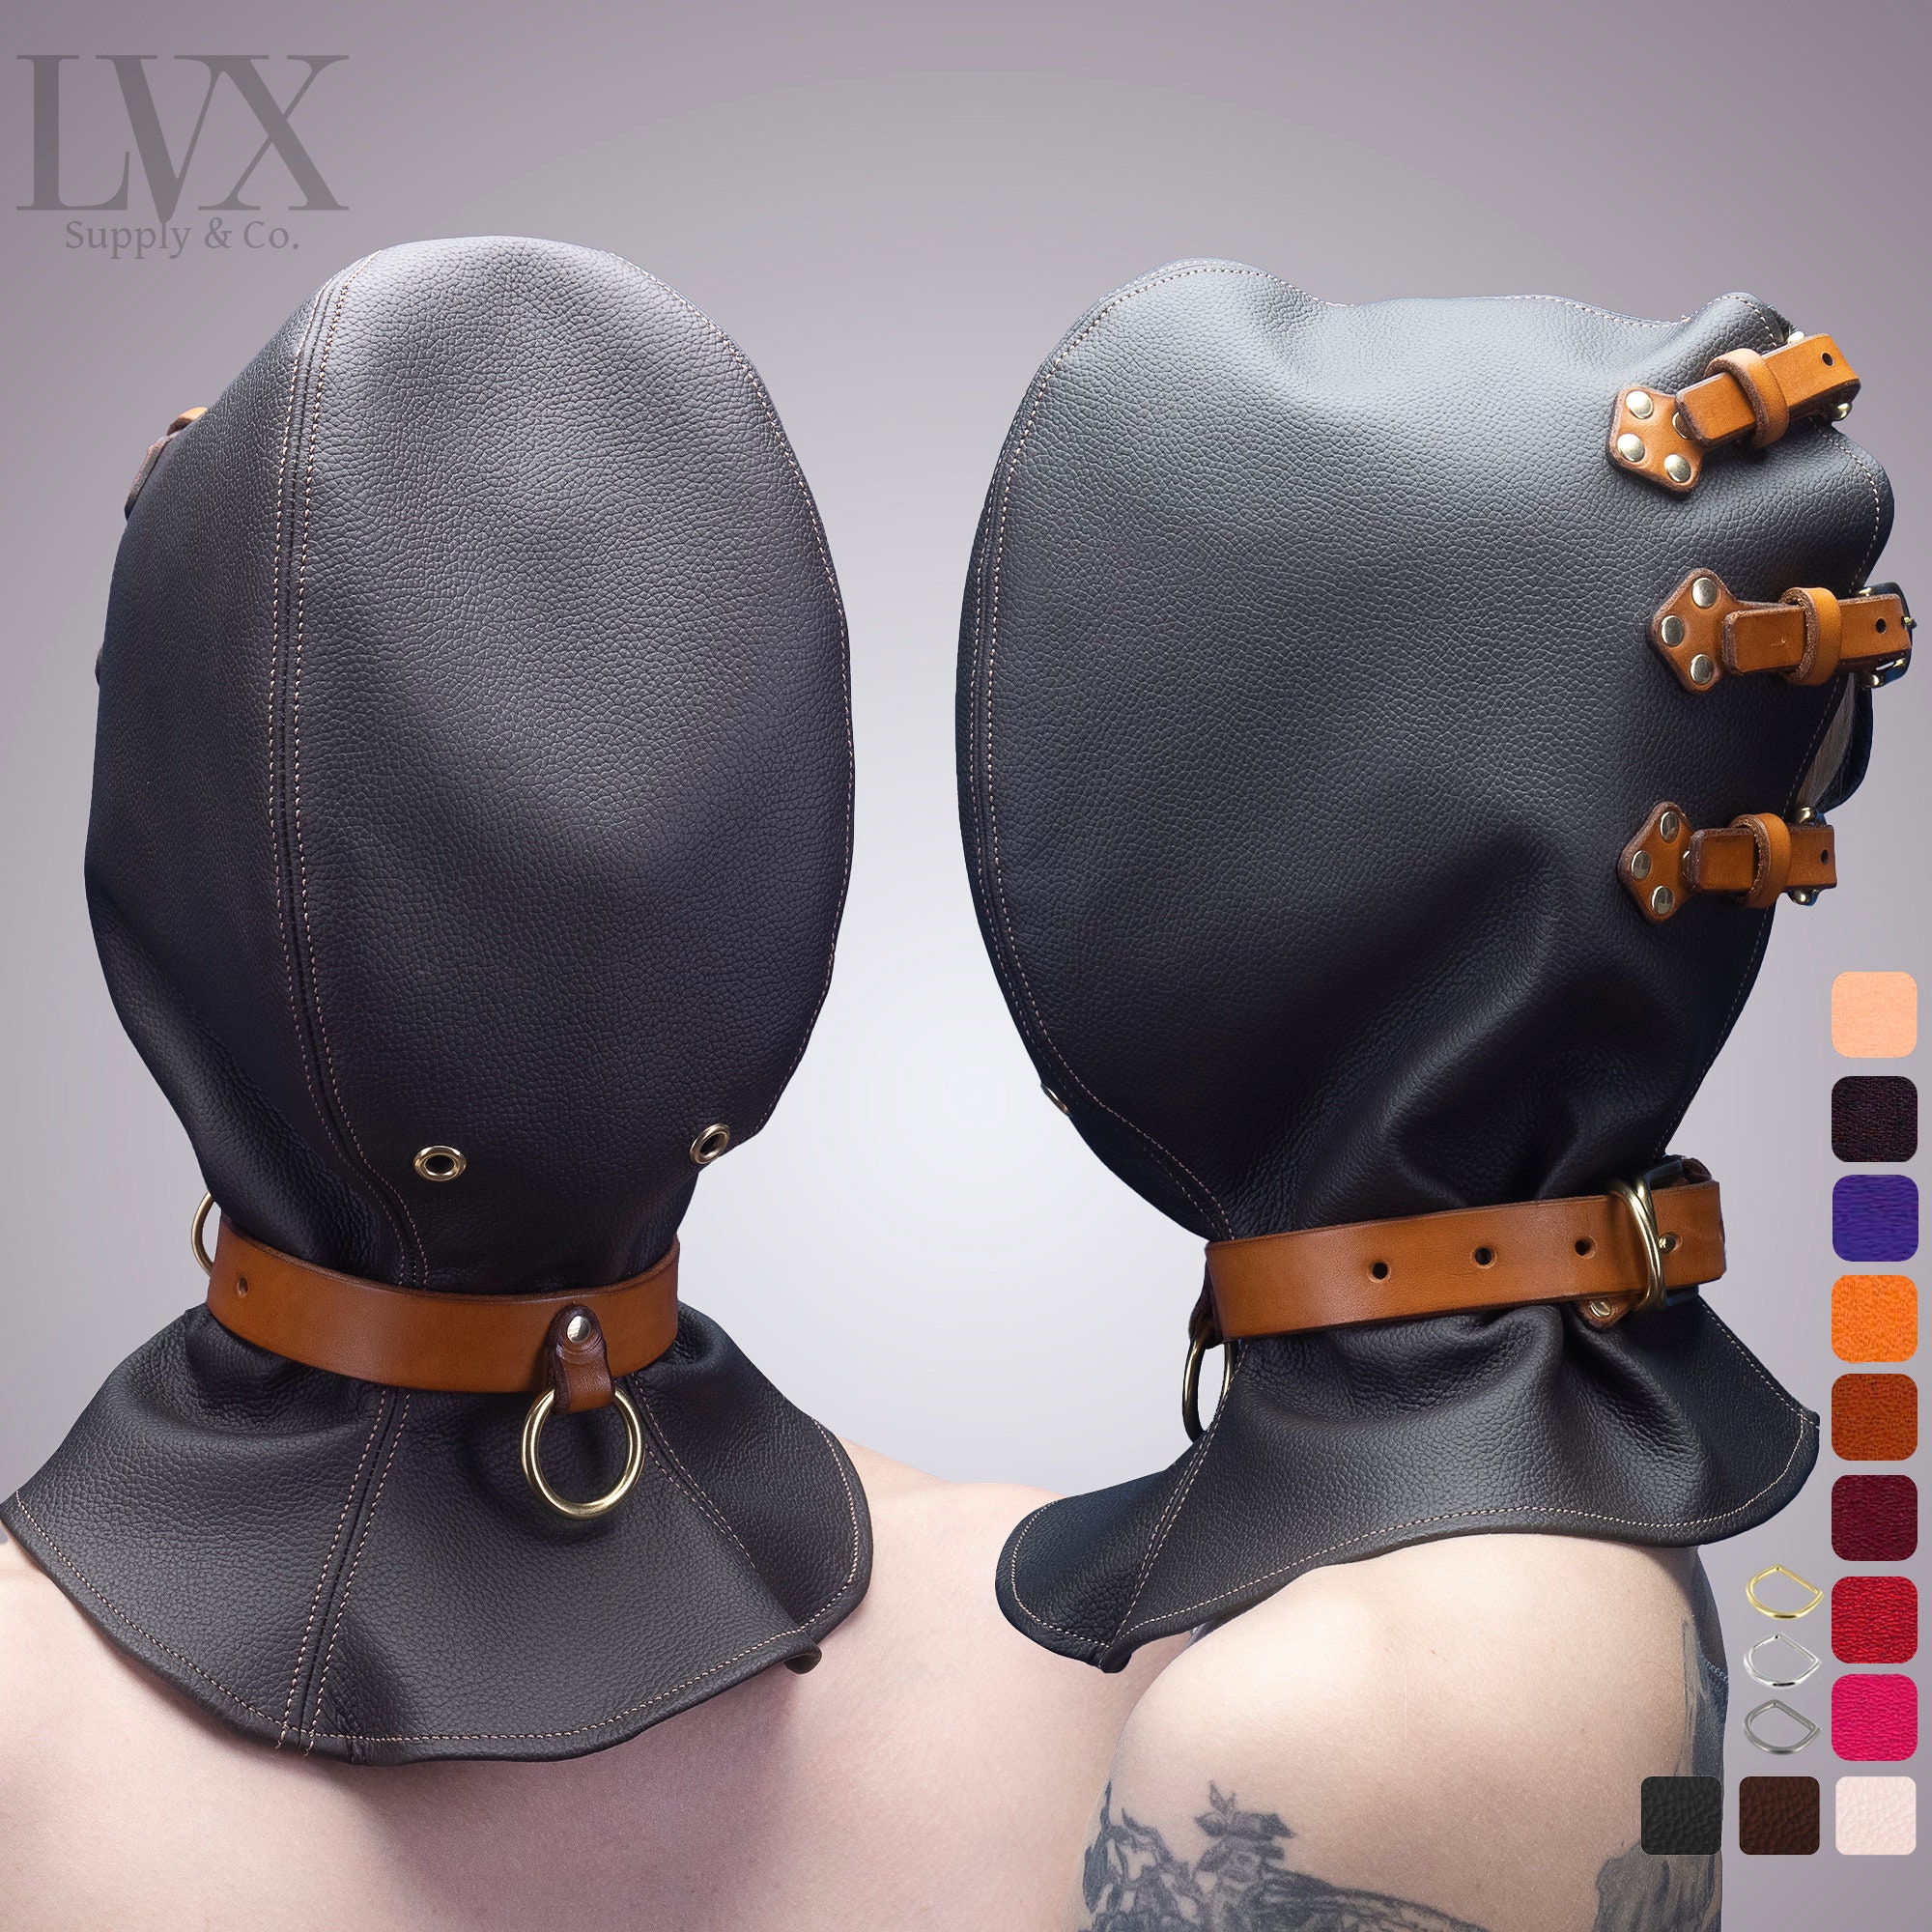 Engraved & Molded Leather Mask [Suede-Lined] - LVX Supply & Co